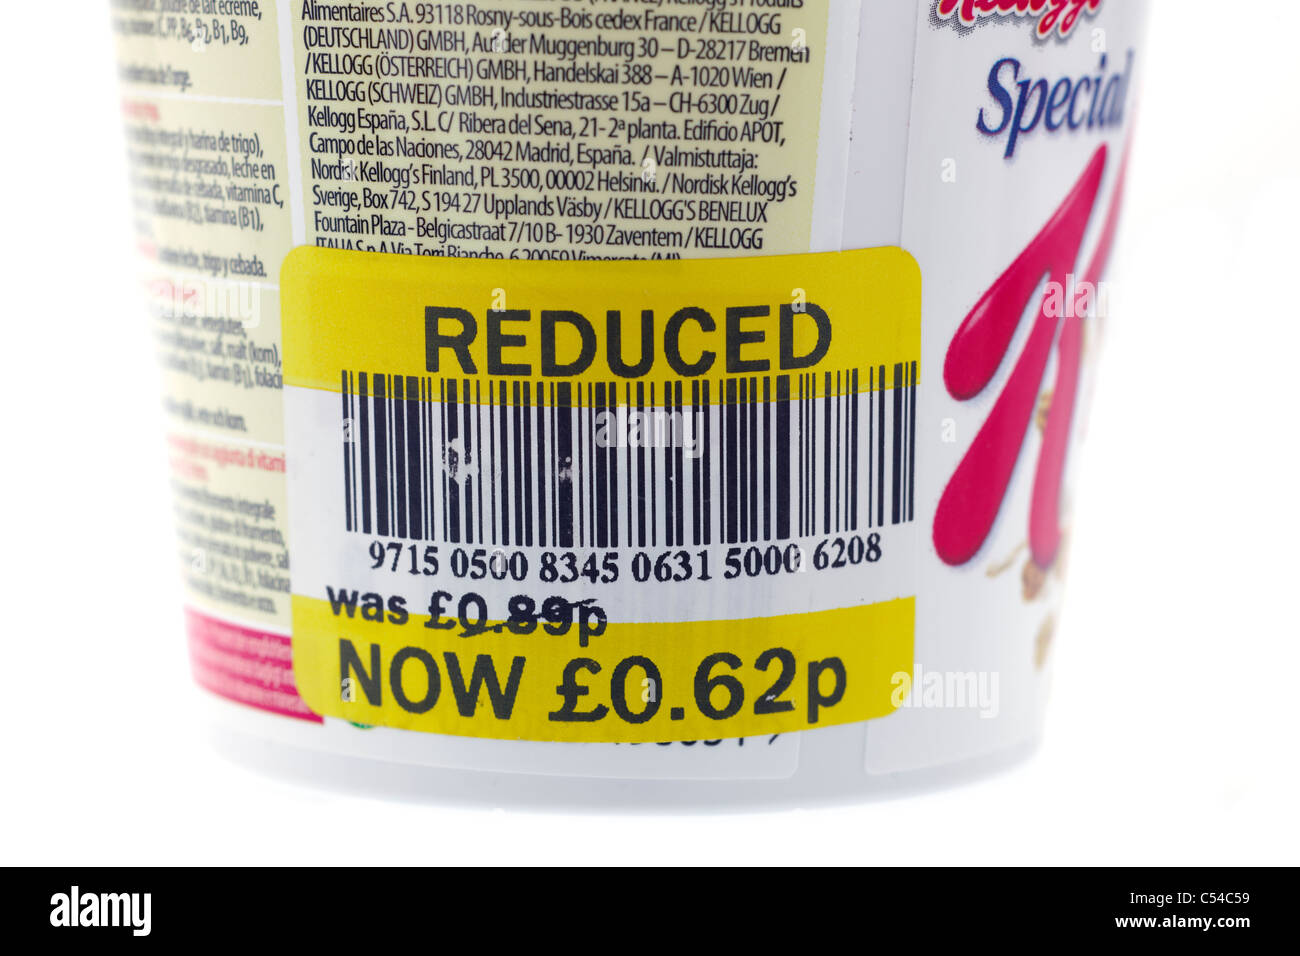 Supermarket reduction label giving a reduced price from 89 pence t0 62 pence. EDITORIAL ONLY Stock Photo